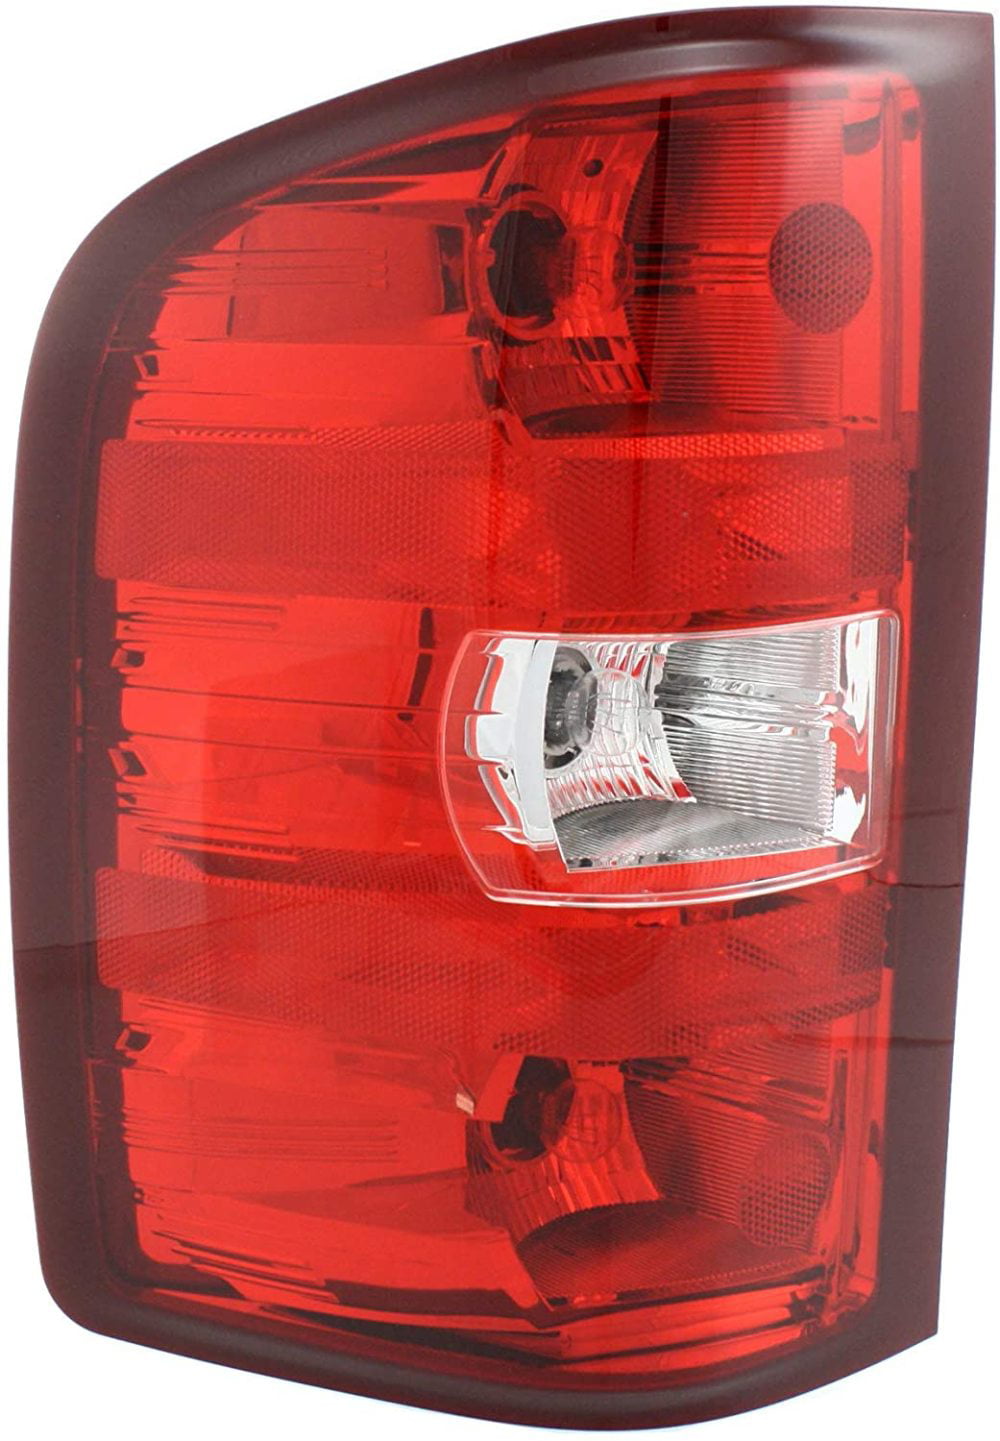 s Evan-Fischer EVA13572062557 New Direct Fit Headlight Head Lamp Set of 2 Composite Clear Lens Halogen With Bulb Driver and Passenger Side Replaces Partslink# SU2503105 SU2502105 